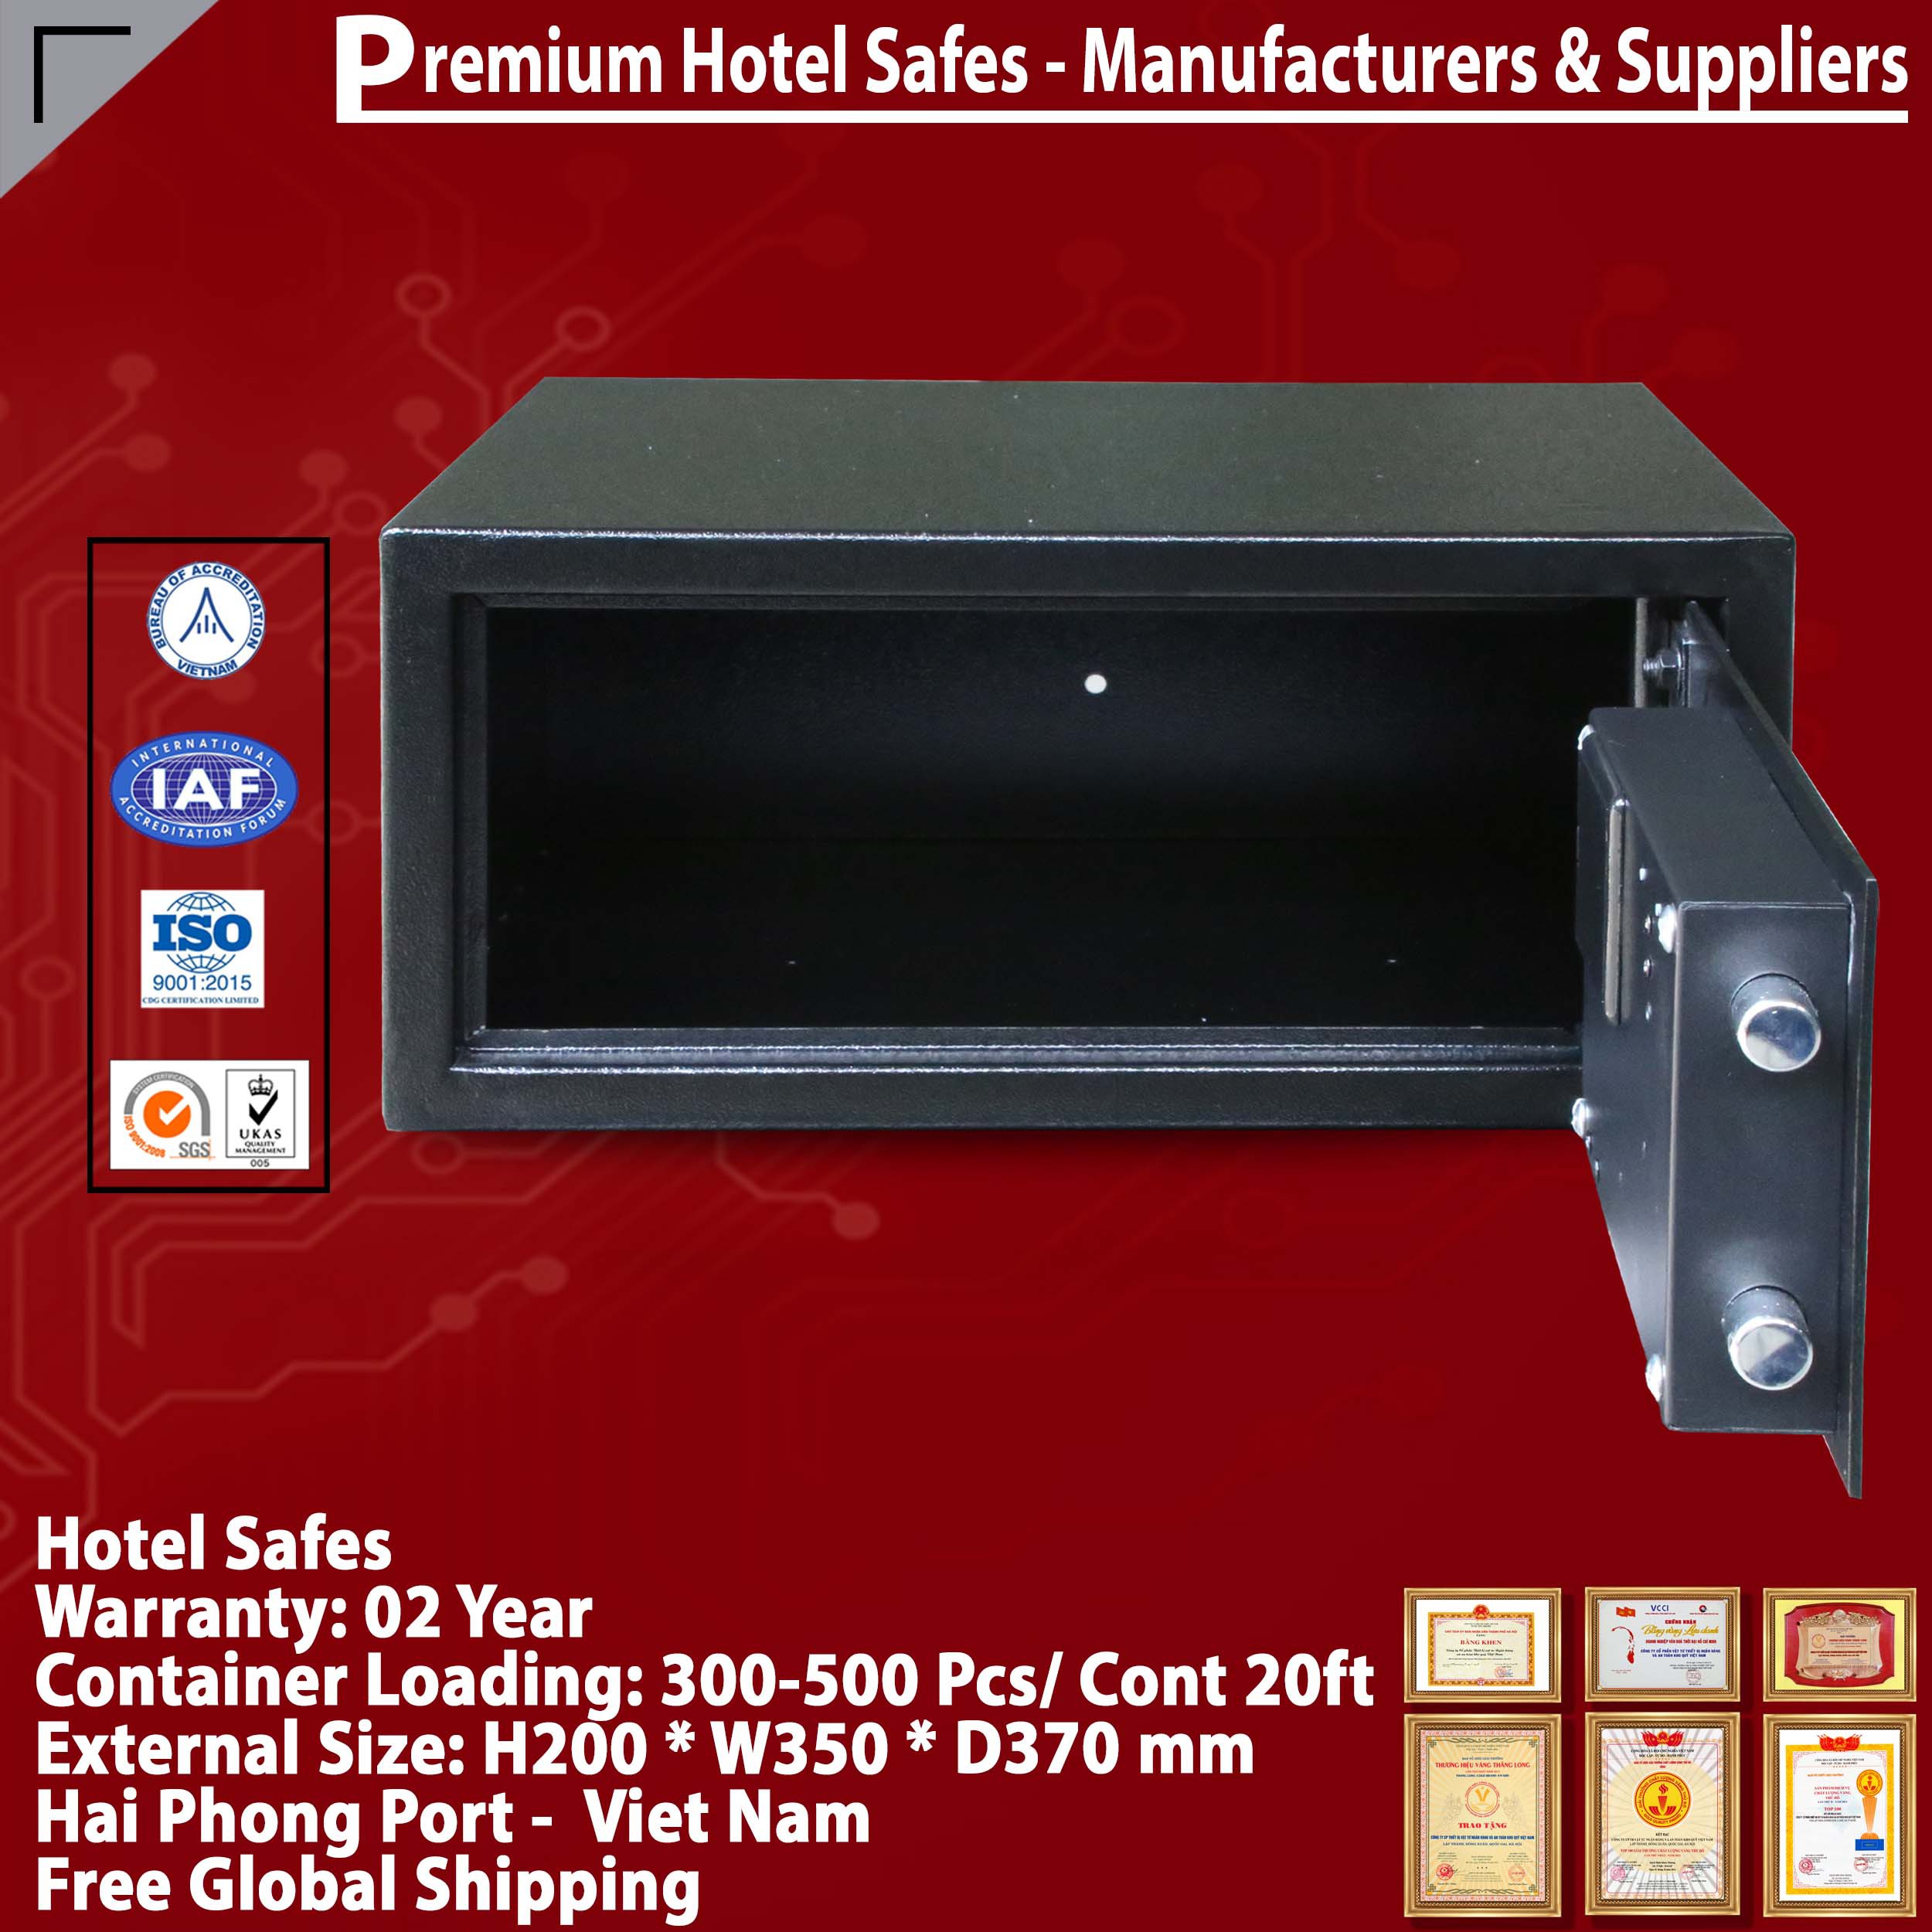 Used Hotel Safes Made In Viet Nam